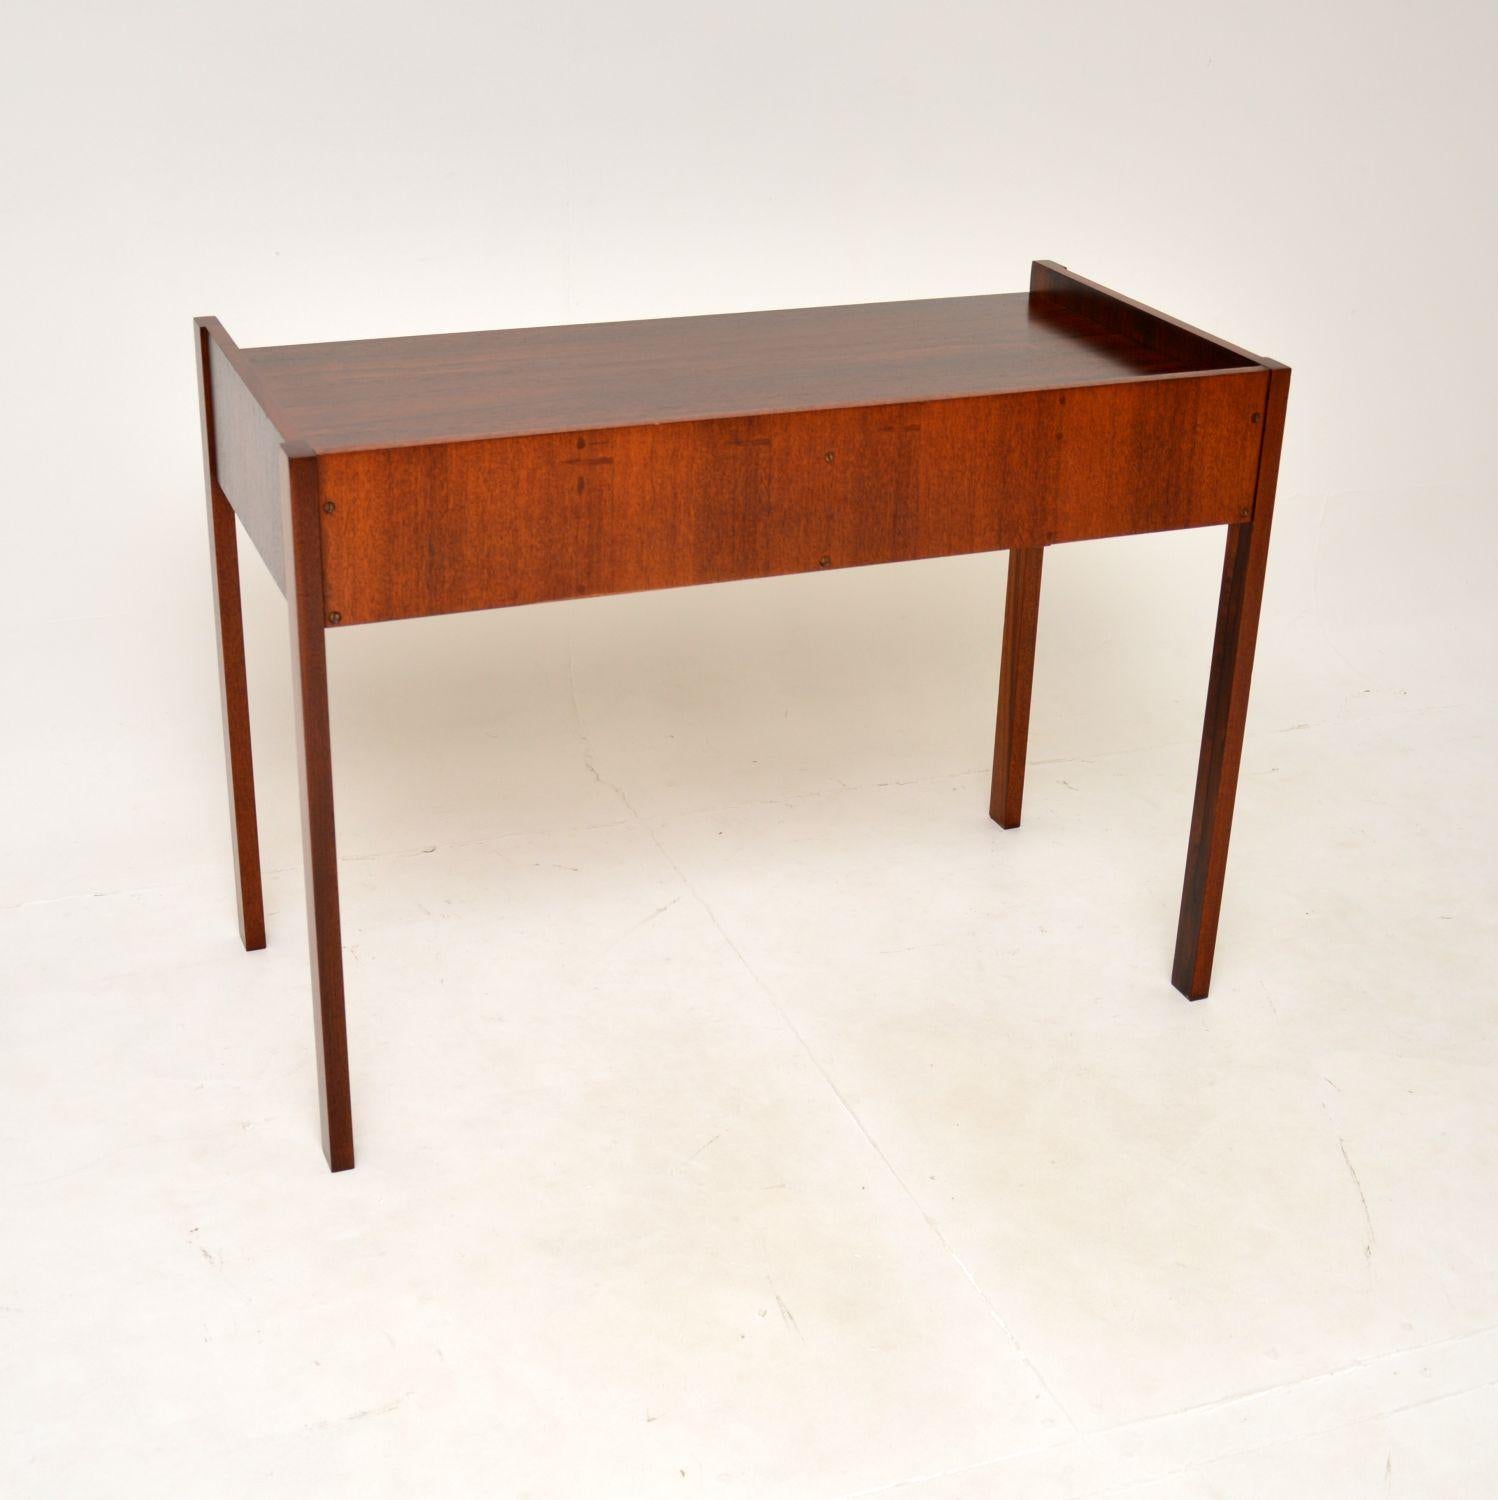 A stunning vintage console table / desk by Robert Heritage for Archie Shine. This was made in England, it dates from the 1960’s.

It is of superb quality with an incredibly beautiful design. The grain patterns and colour tones are absolutely